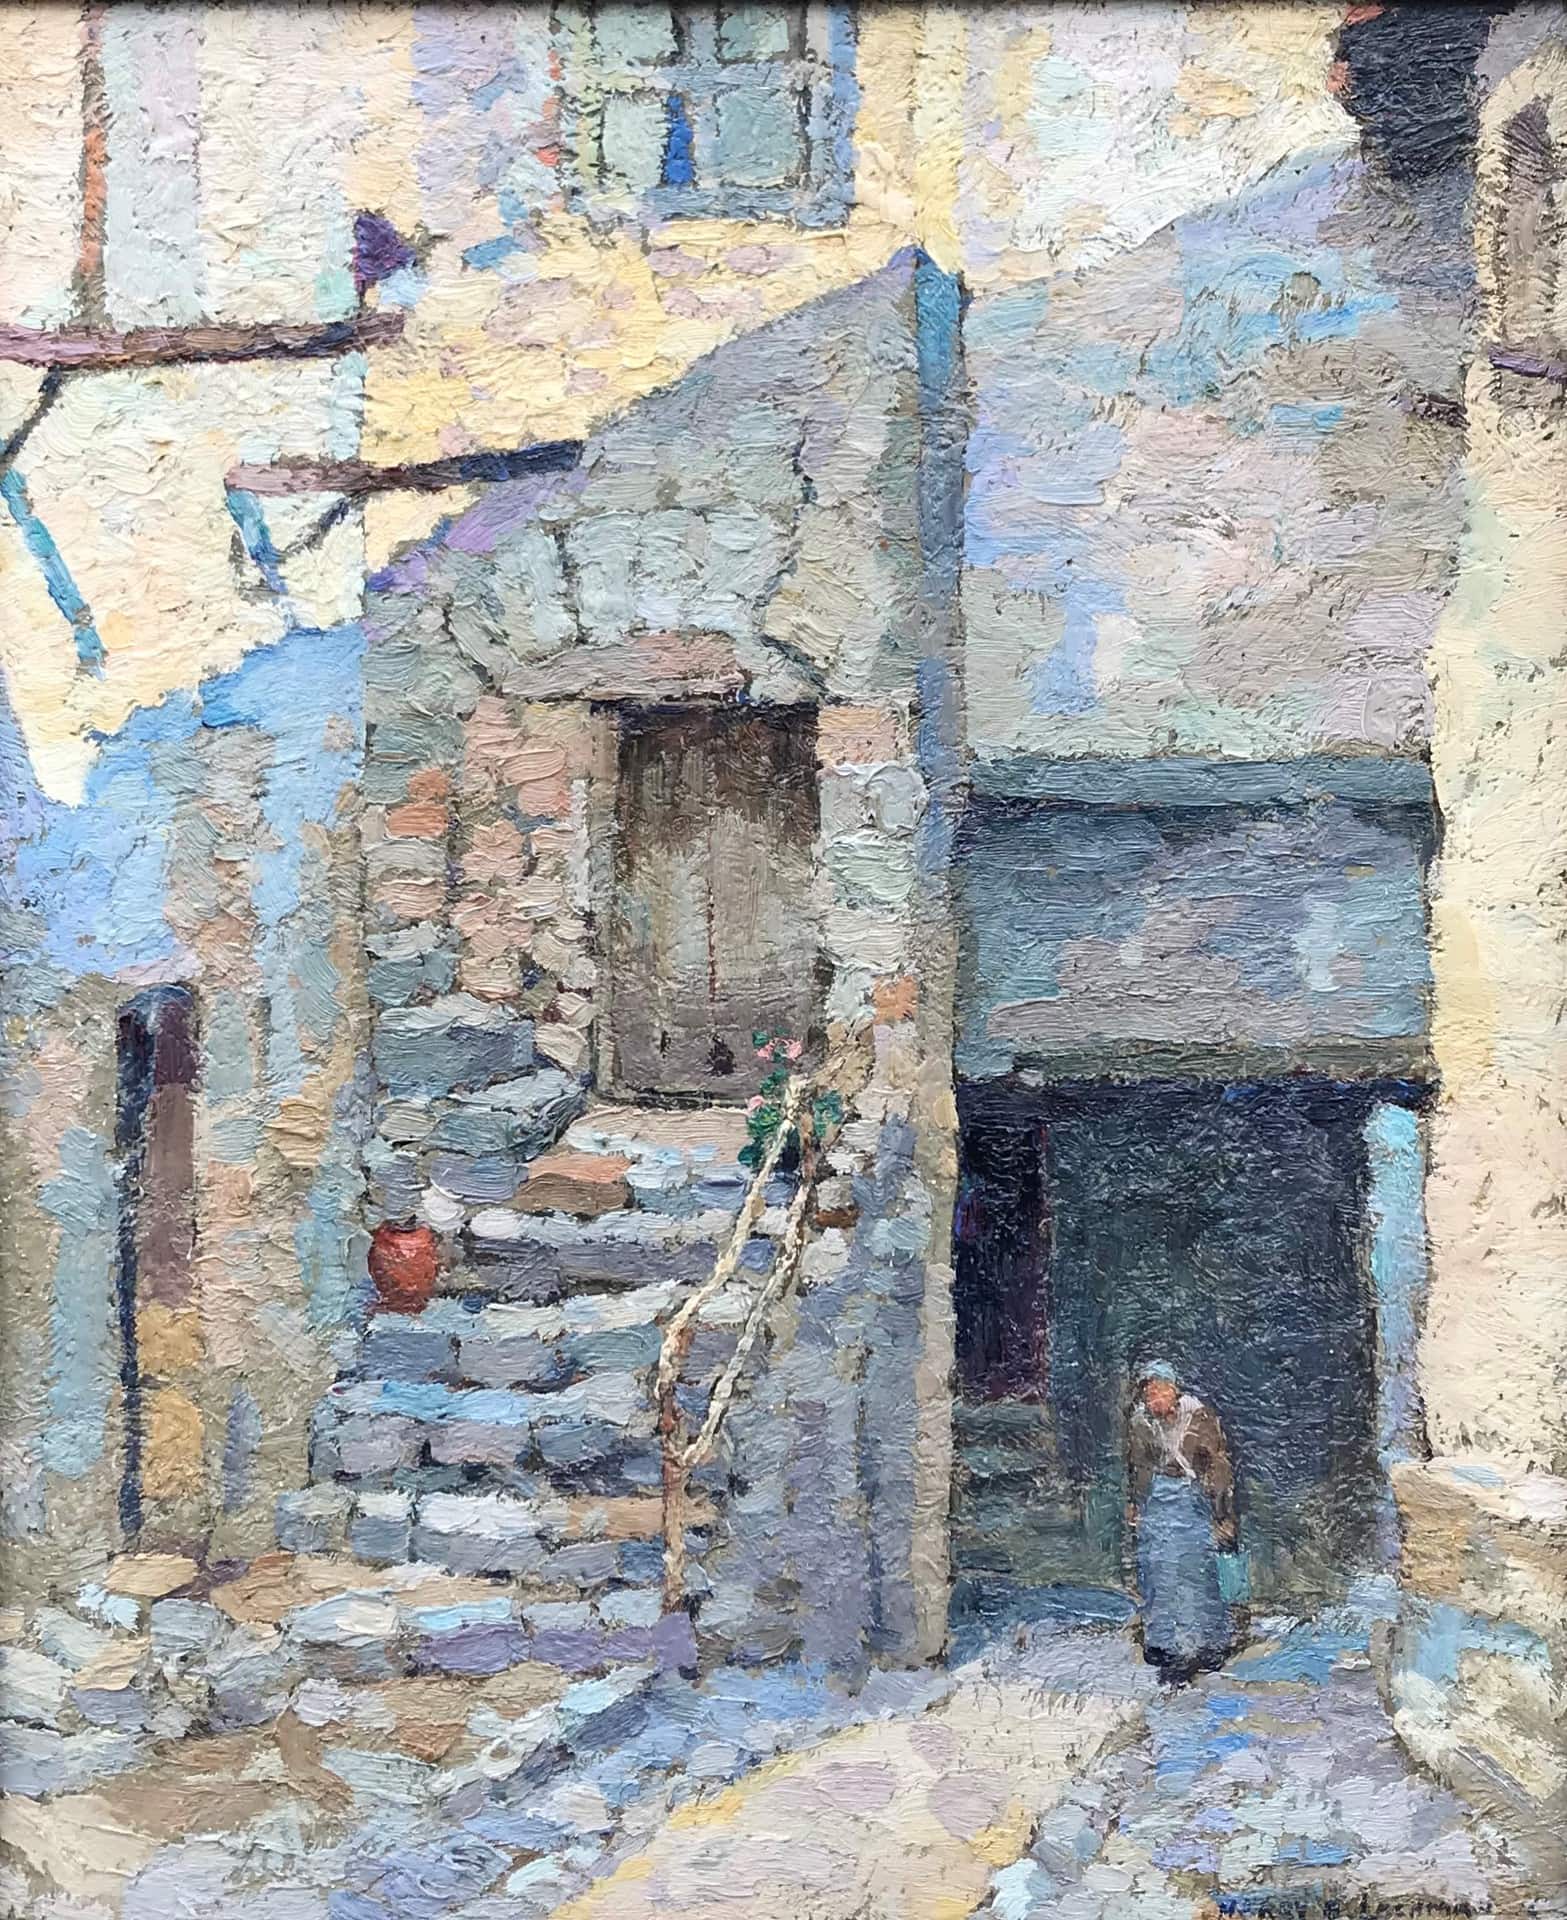 Lachman's Sunlight and Shadow. A European village street scene with a stooped woman walking a cobblestone road. The light - or its absence - is the real subject, with a heavy shadow cutting across the buildings.